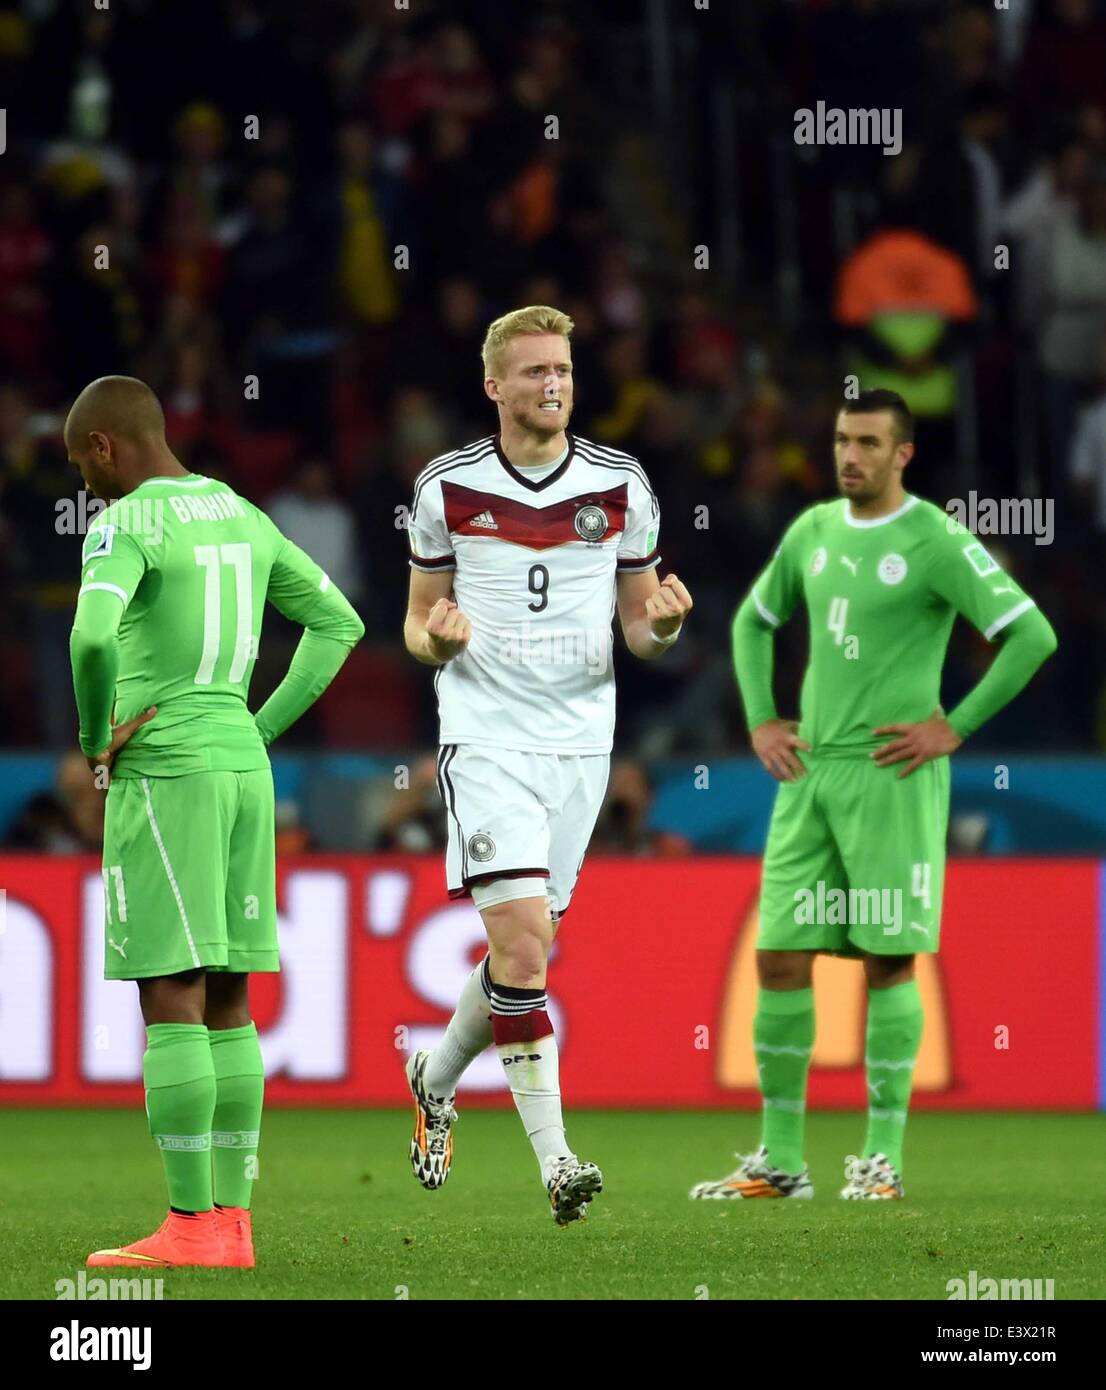 Porto Alegre, Brazil. 30th June, 2014. Germany's Andre Schurrle (C) celebrates a goal during the extra time of a Round of 16 match between Germany and Algeria of 2014 FIFA World Cup at the Estadio Beira-Rio Stadium in Porto Alegre, Brazil, on June 30, 2014. Credit:  Li Ga/Xinhua/Alamy Live News Stock Photo